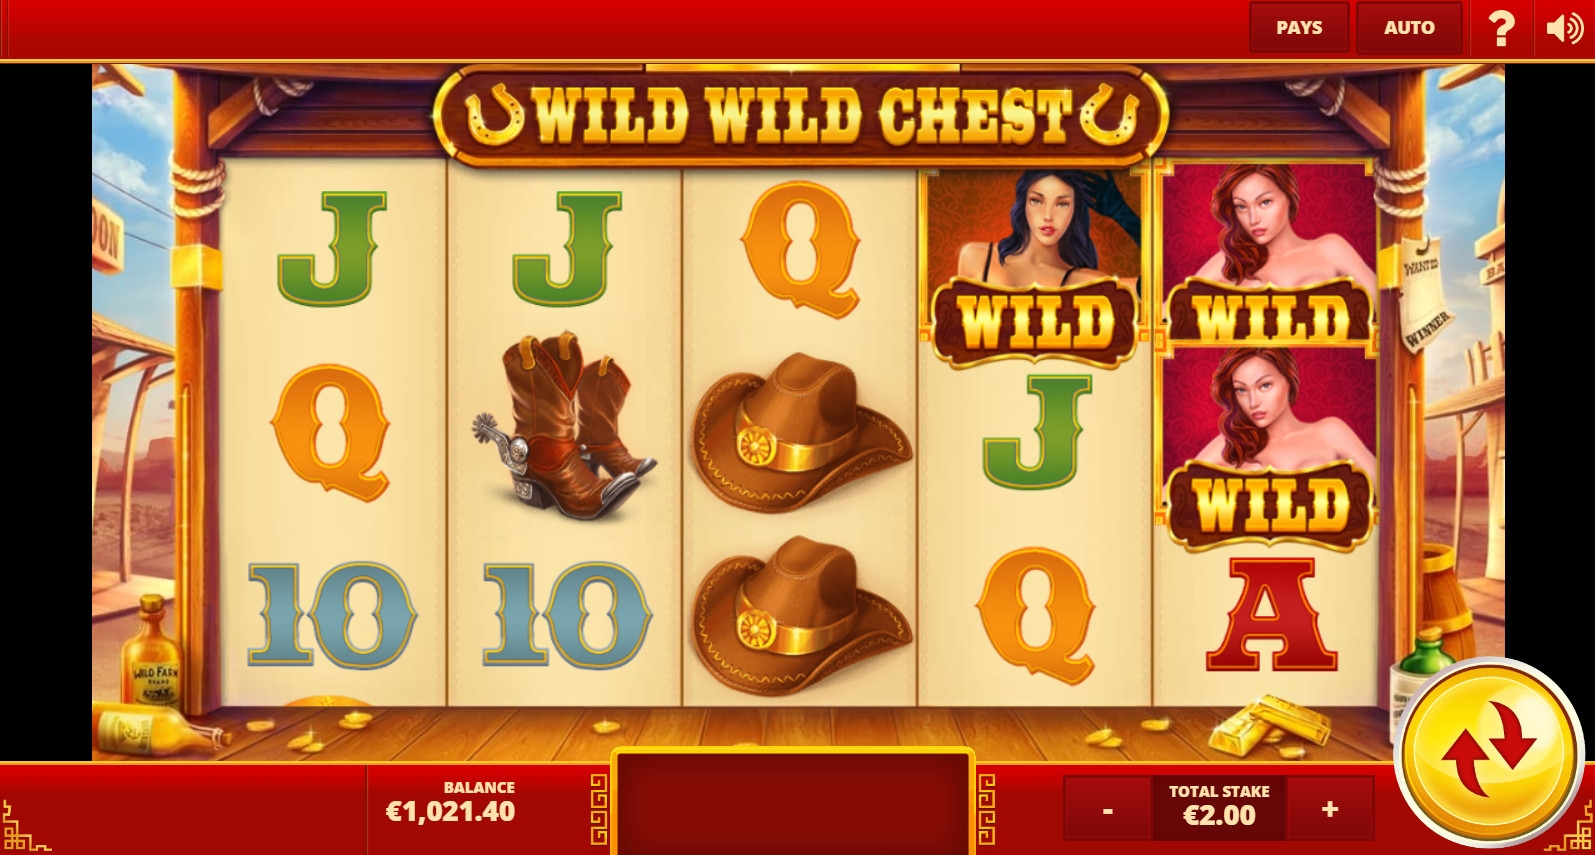 Wild Wild Chest (Wild Wild Chest) from category Slots